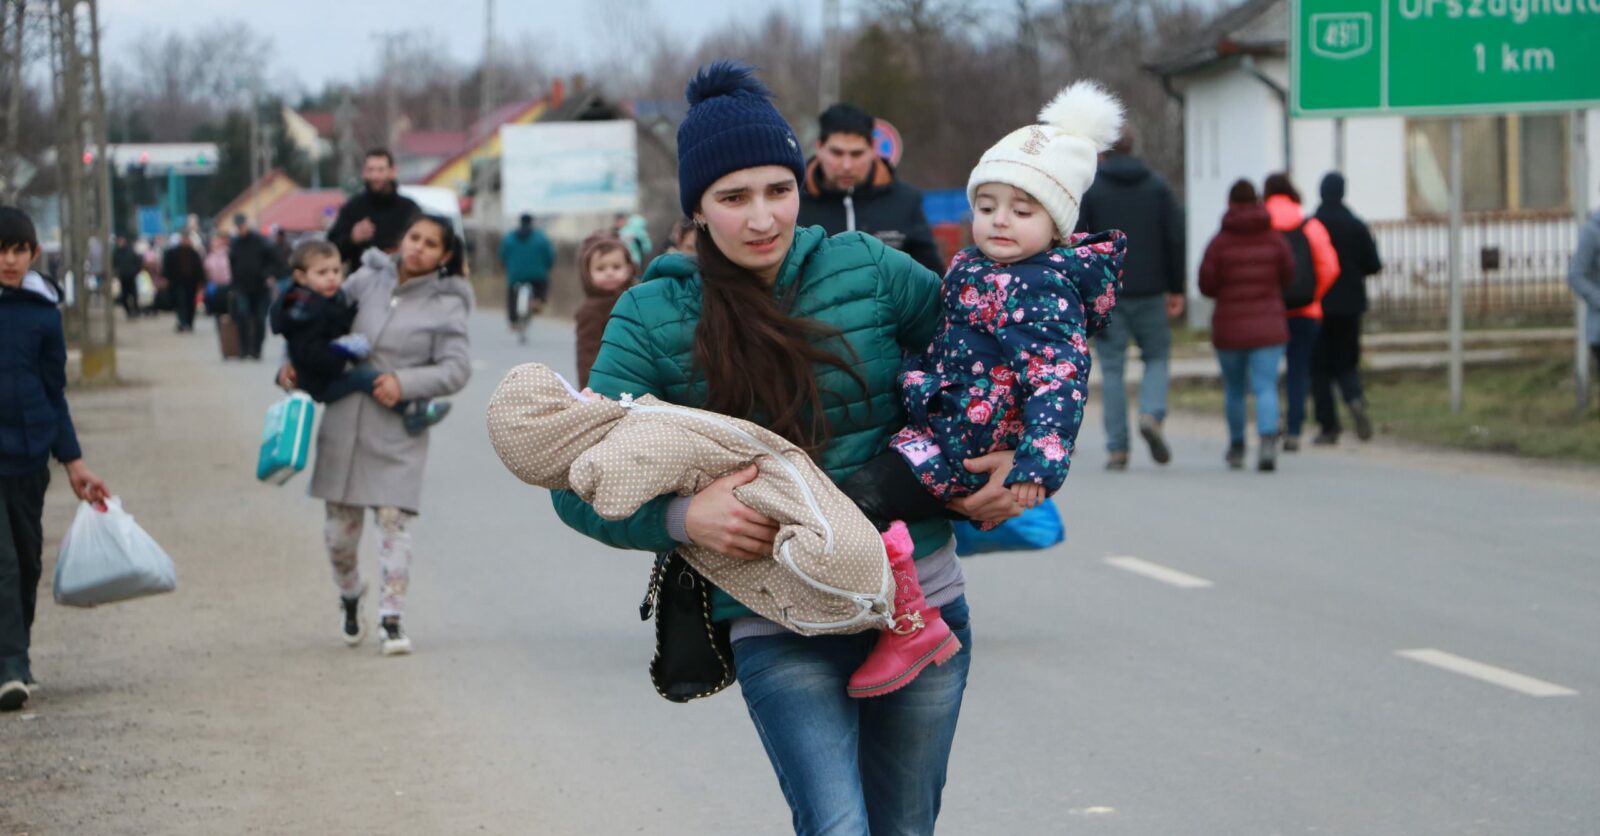 A young Ukrainian mother carries her three-month-old baby and her three-year-old toddler across the Tiszabecs border crossing into Hungary after she fled Ukraine leaving her husband behind. On arrival, Ukrainians and other nationalities are screened and registered. They are guided to assembly points where they can apply for asylum and are given temporary documentation. ; Russia launched its military offensive in Ukraine on 24 February 2022. By 27 February, hundreds of thousands of people had fled to safety inside Ukraine or neighbouring countries. The largest numbers headed west into Poland, with others making for Hungary, Moldova, Romania and beyond.